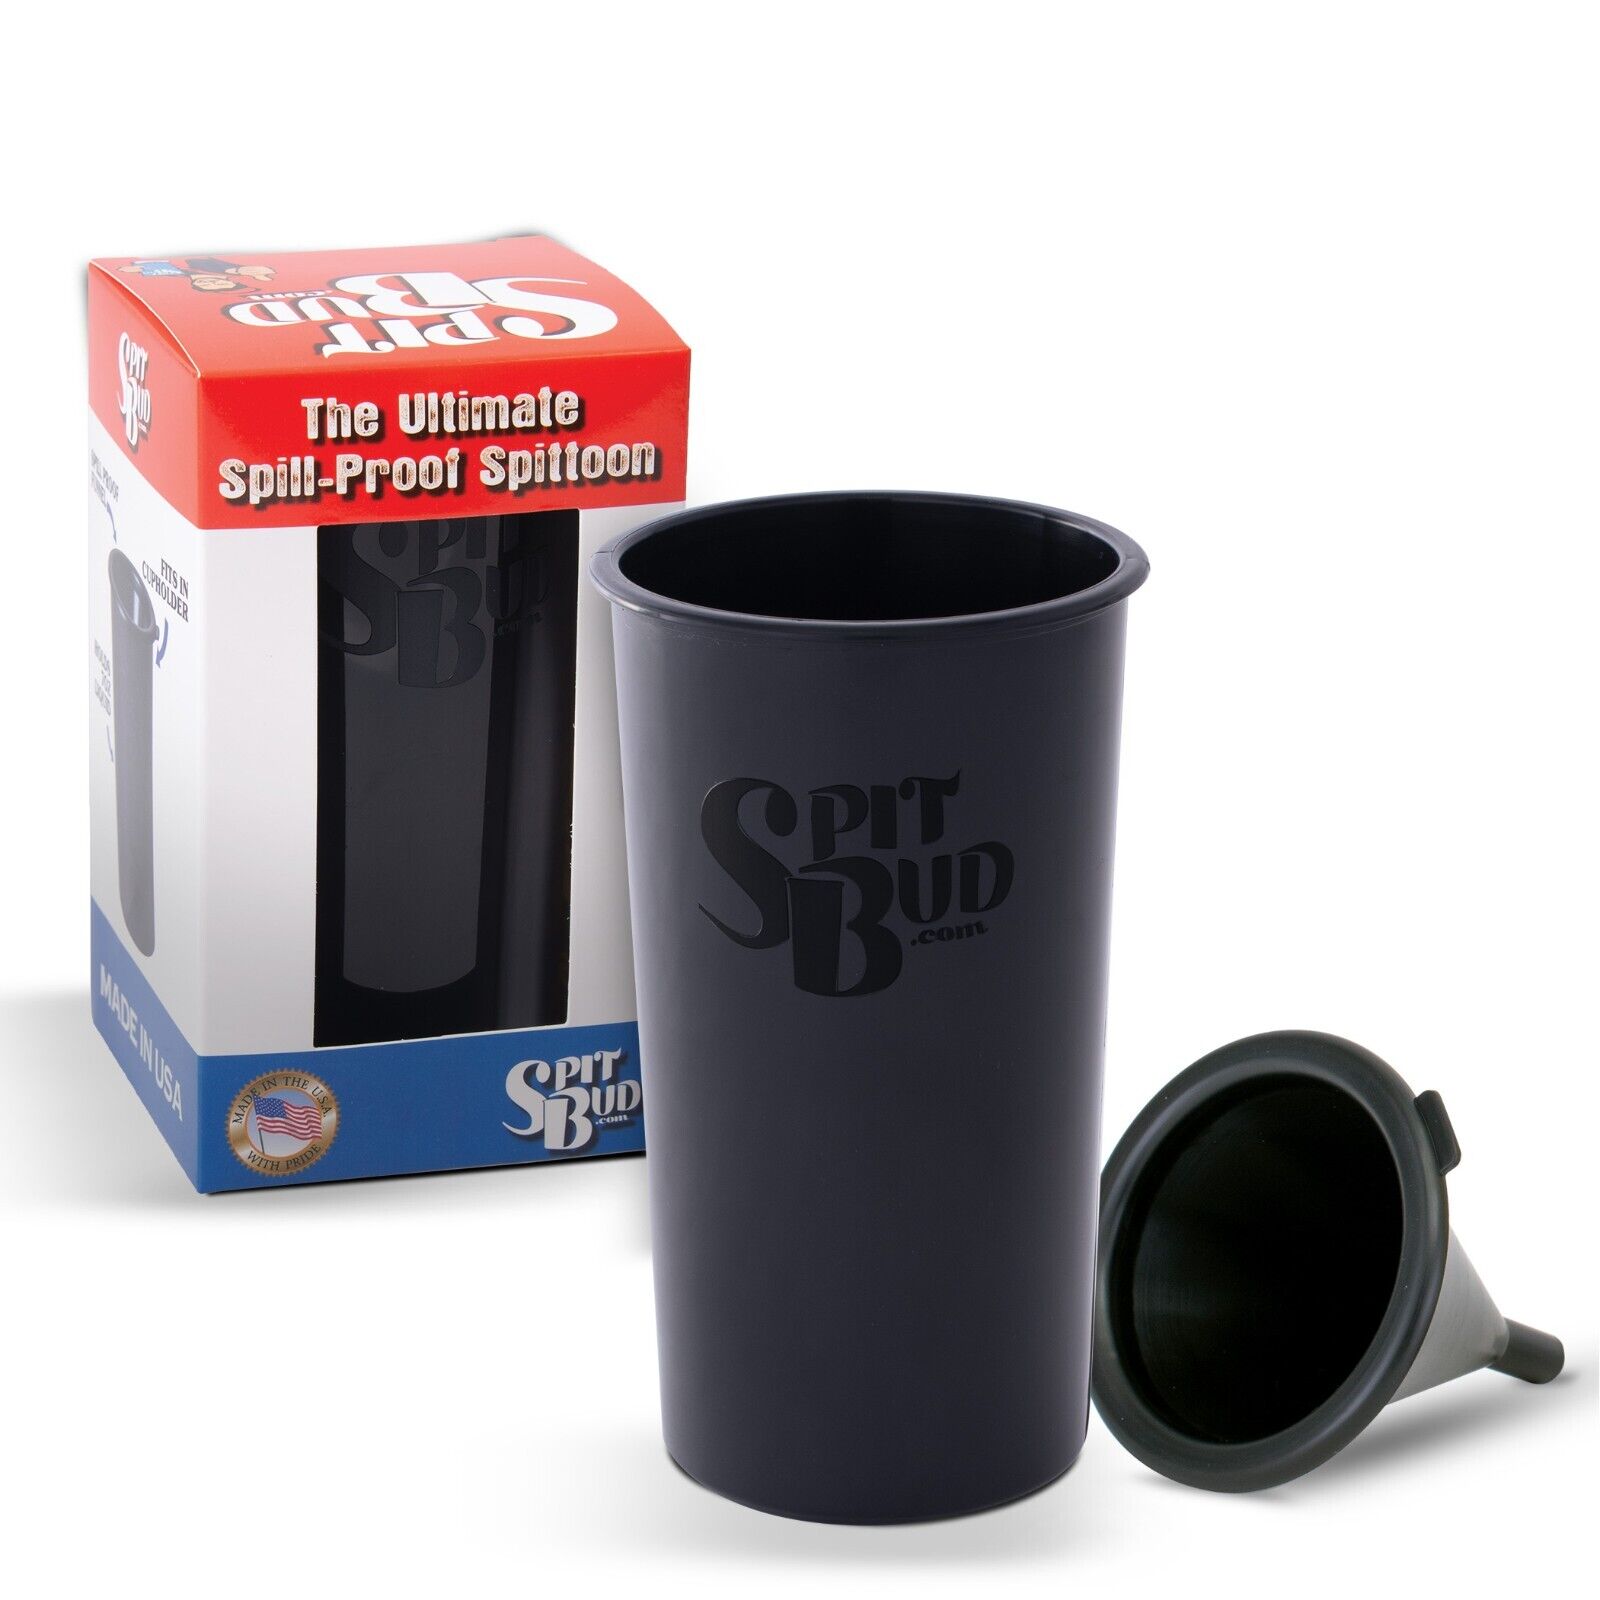 Spit Bud The Ultimate Spill Proof Portable Spittoon - Original Black